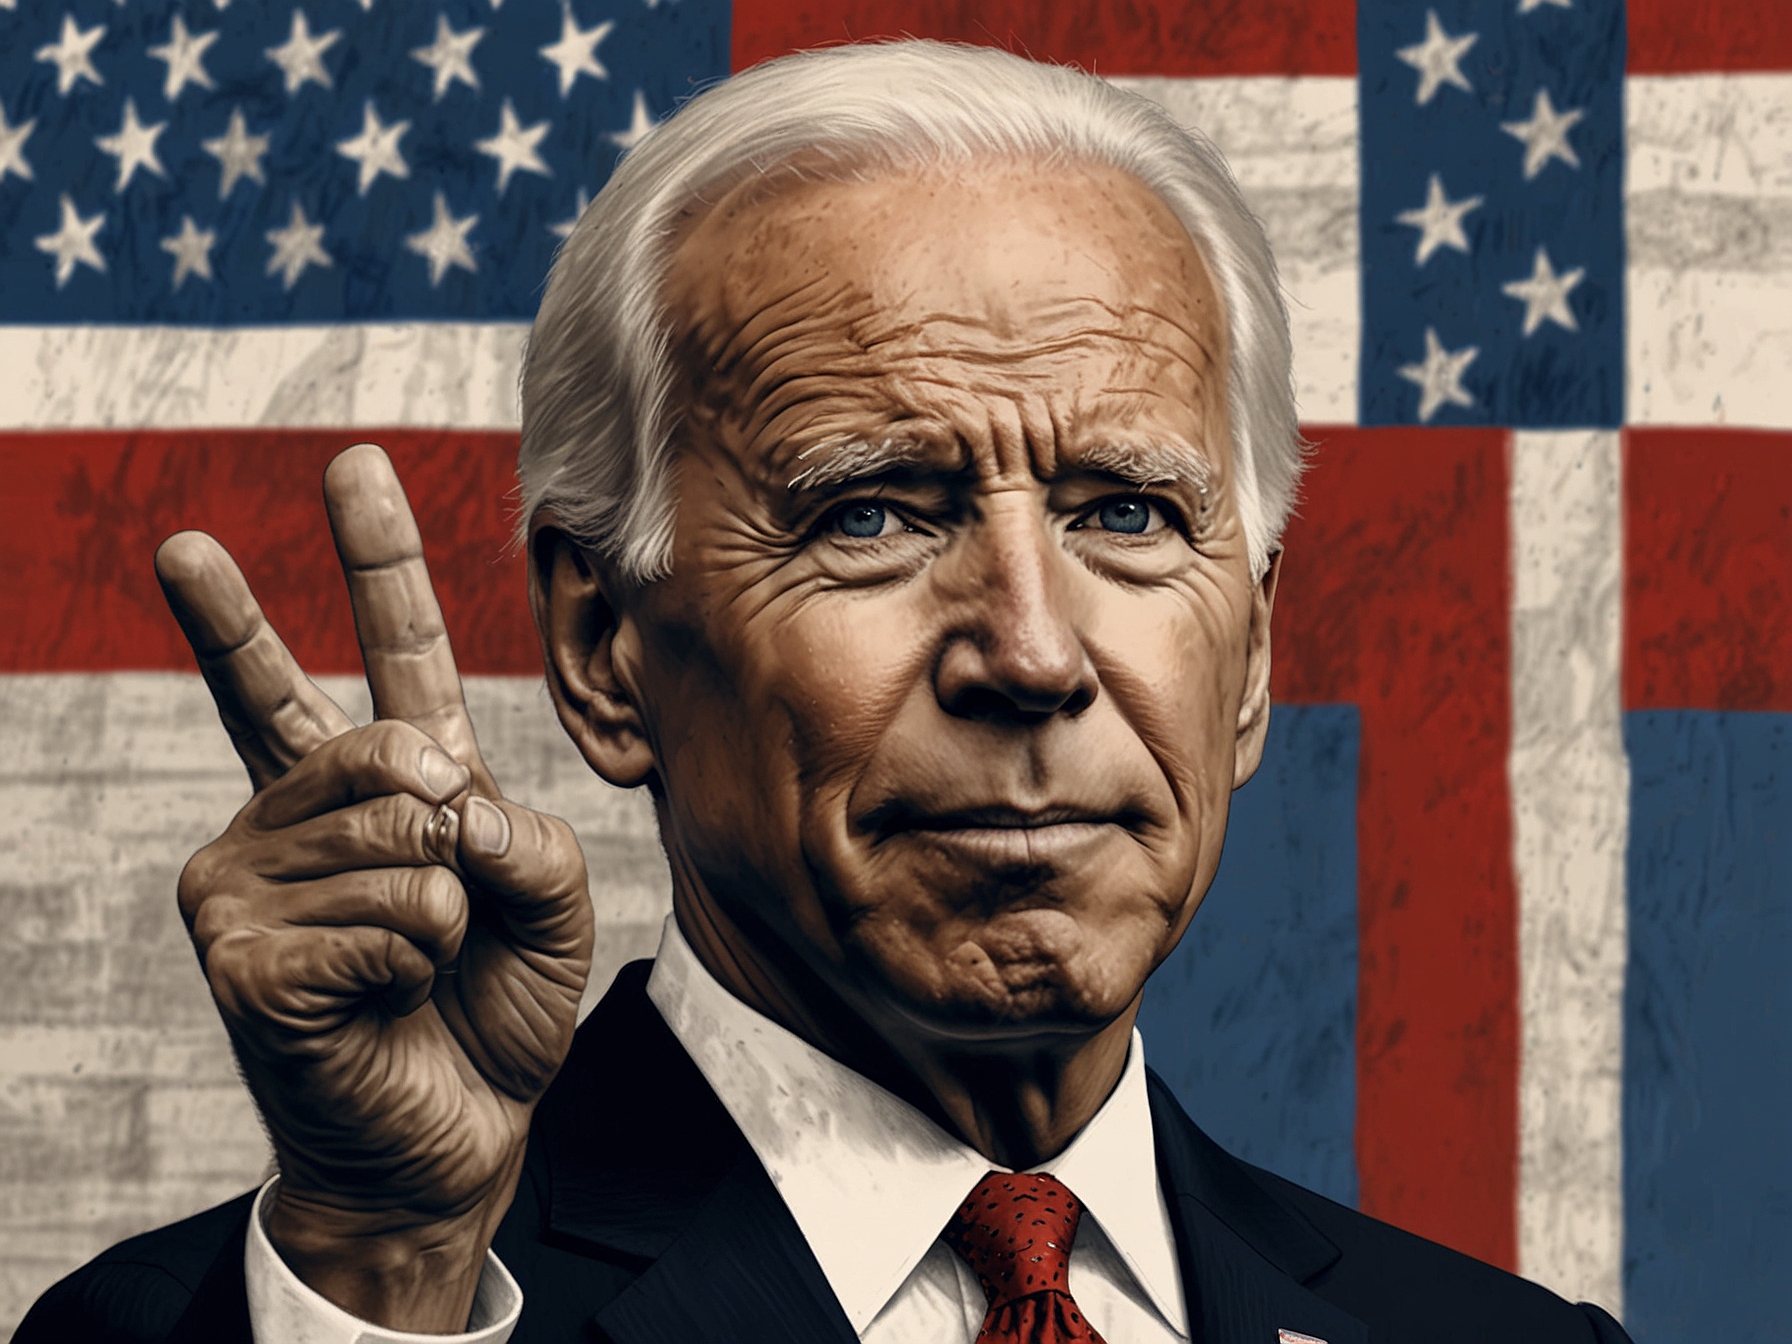 An image capturing Joe Biden emphasizing the importance of protecting democratic values, highlighting his administration's efforts on voting rights and unity.